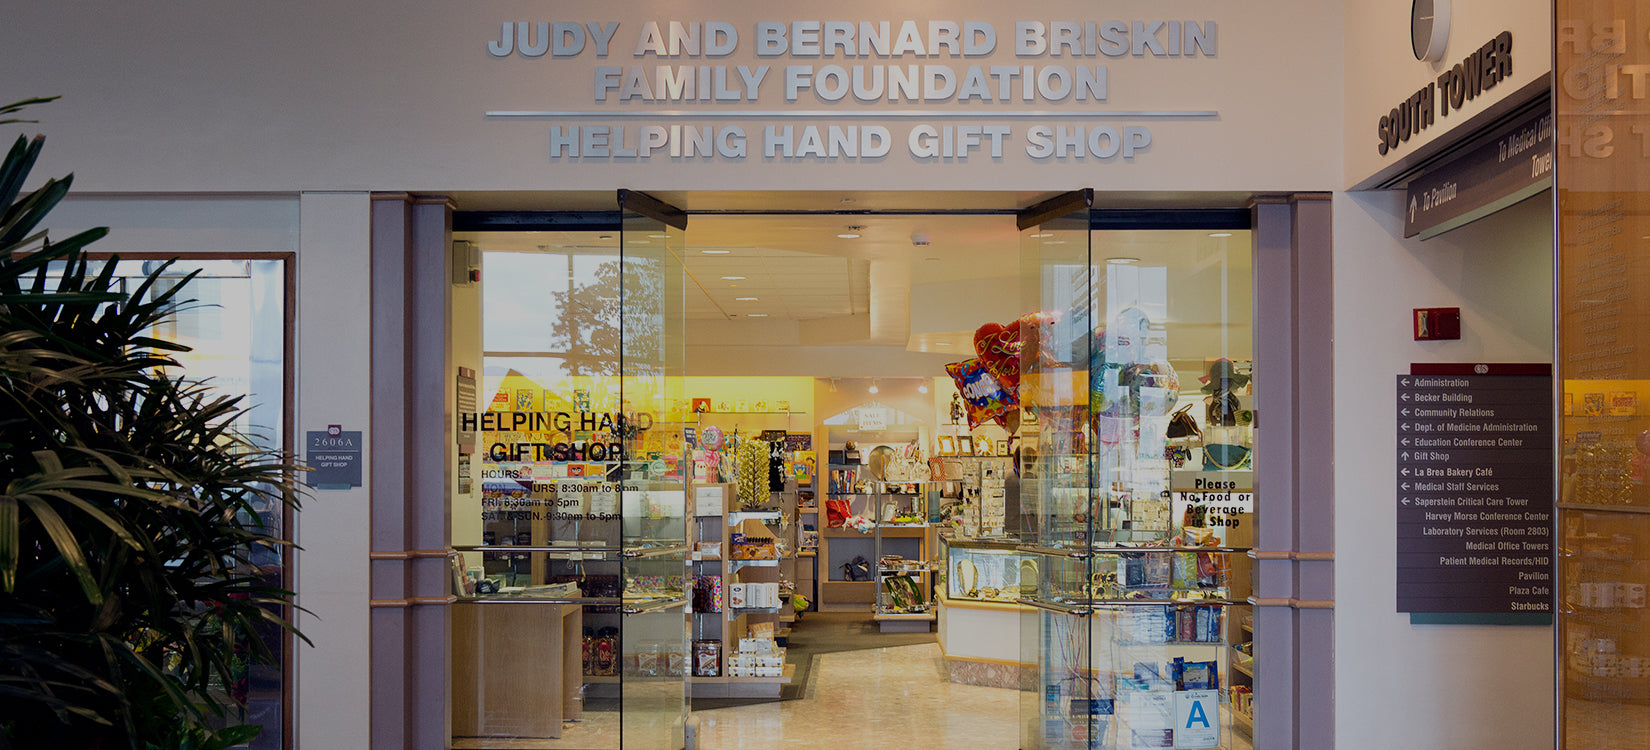 Helping Hand Gift Shop